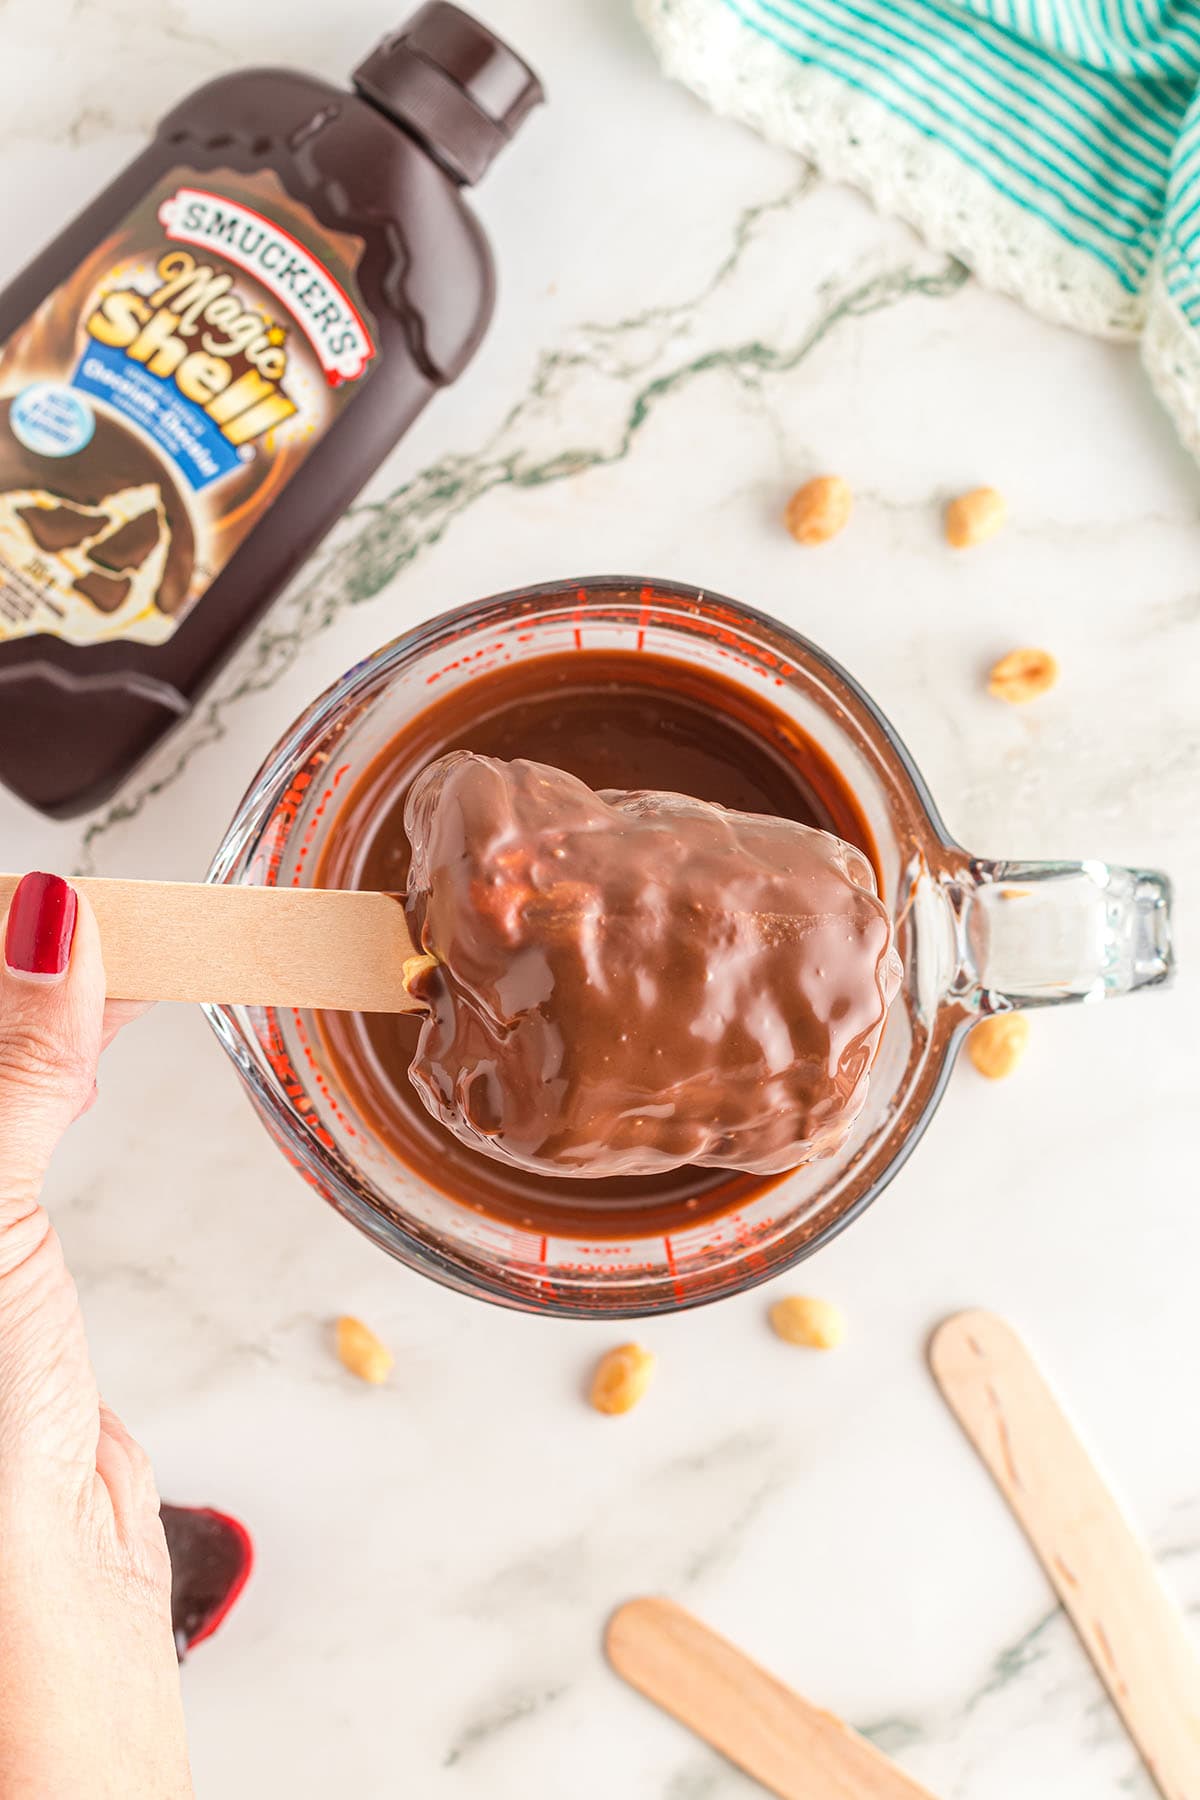 dip DQ Copycat Buster Bars into melted chocolate